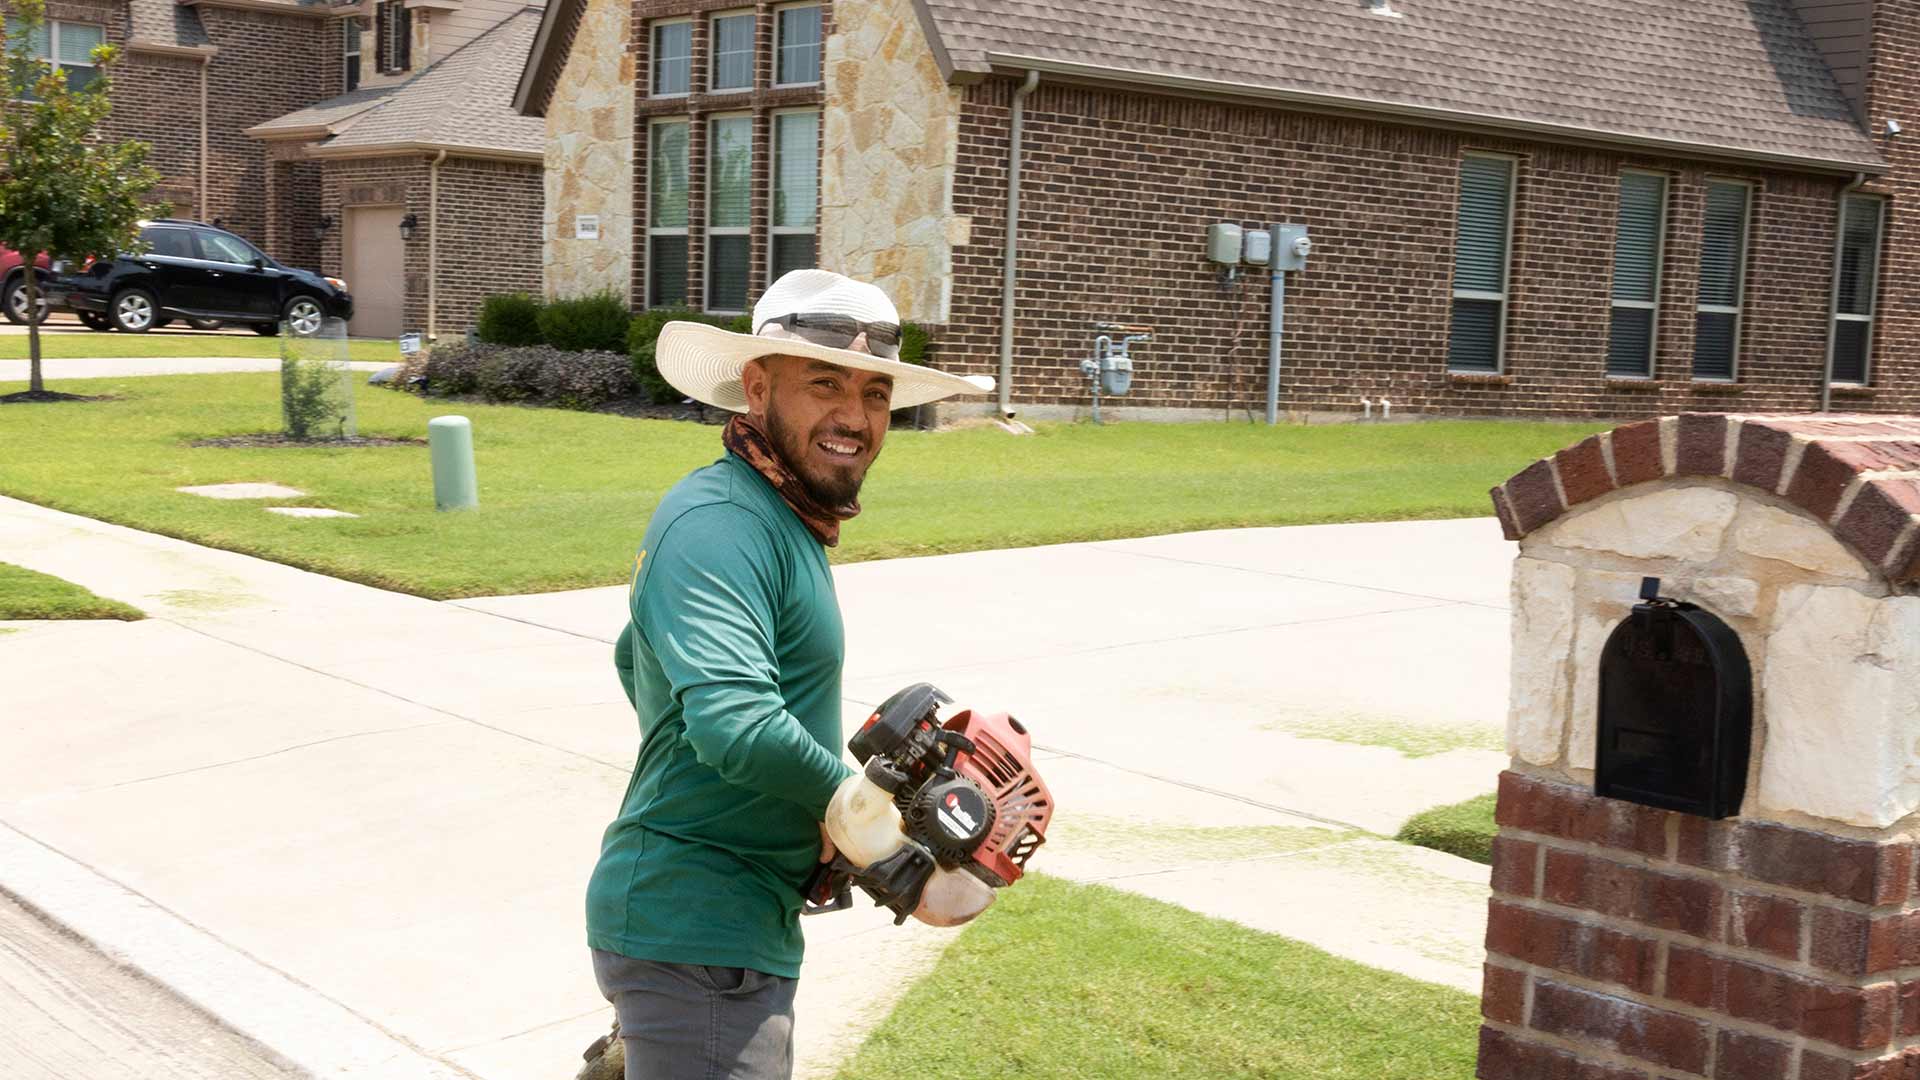 Smiling lawn care worker with weed eater in Wylie, TX.